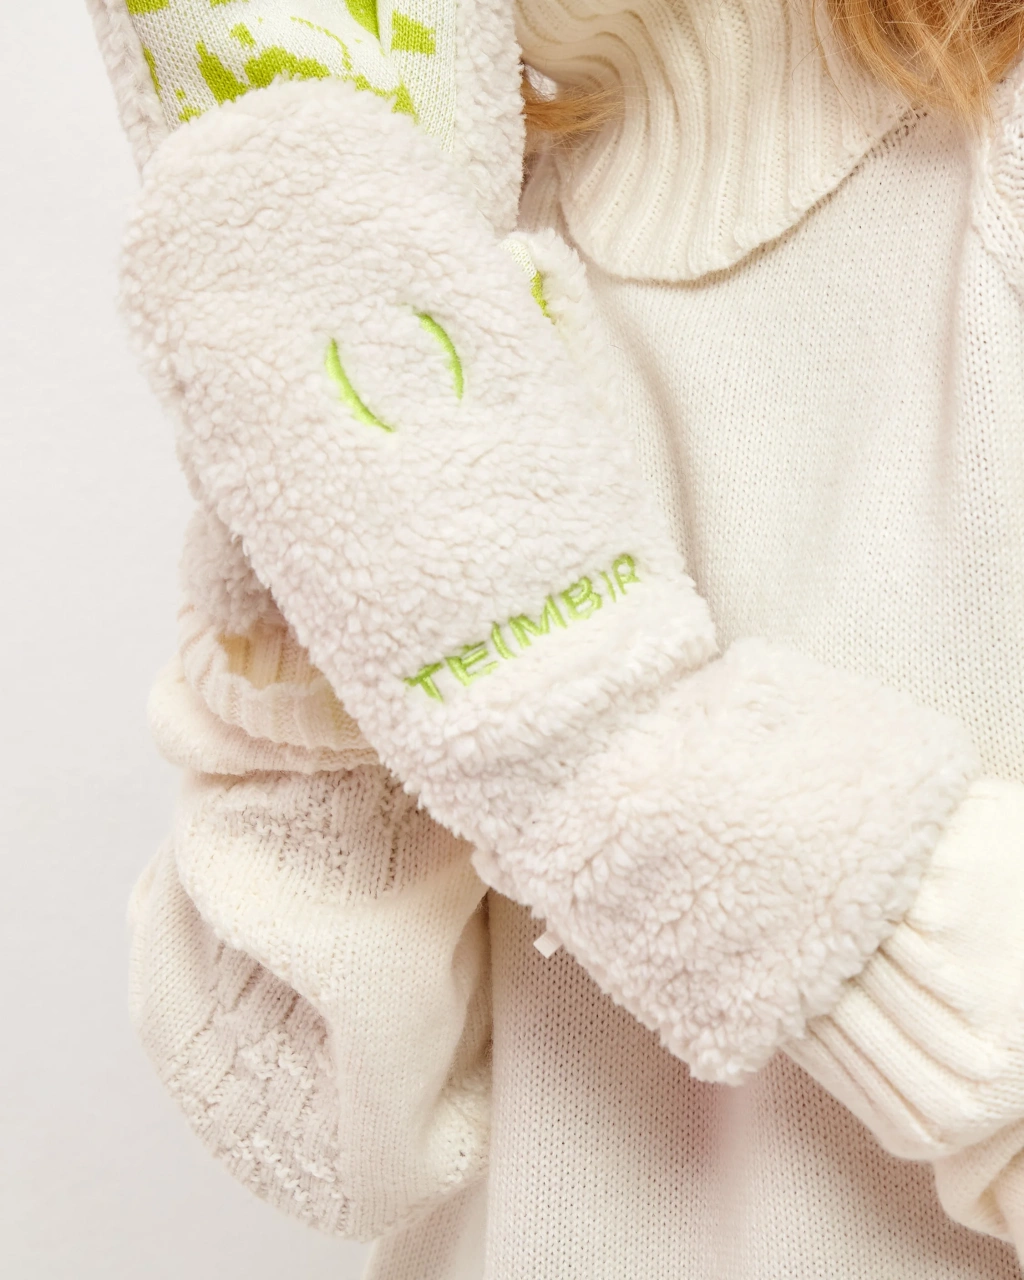 White and lime Urban Bunny knitted gloves